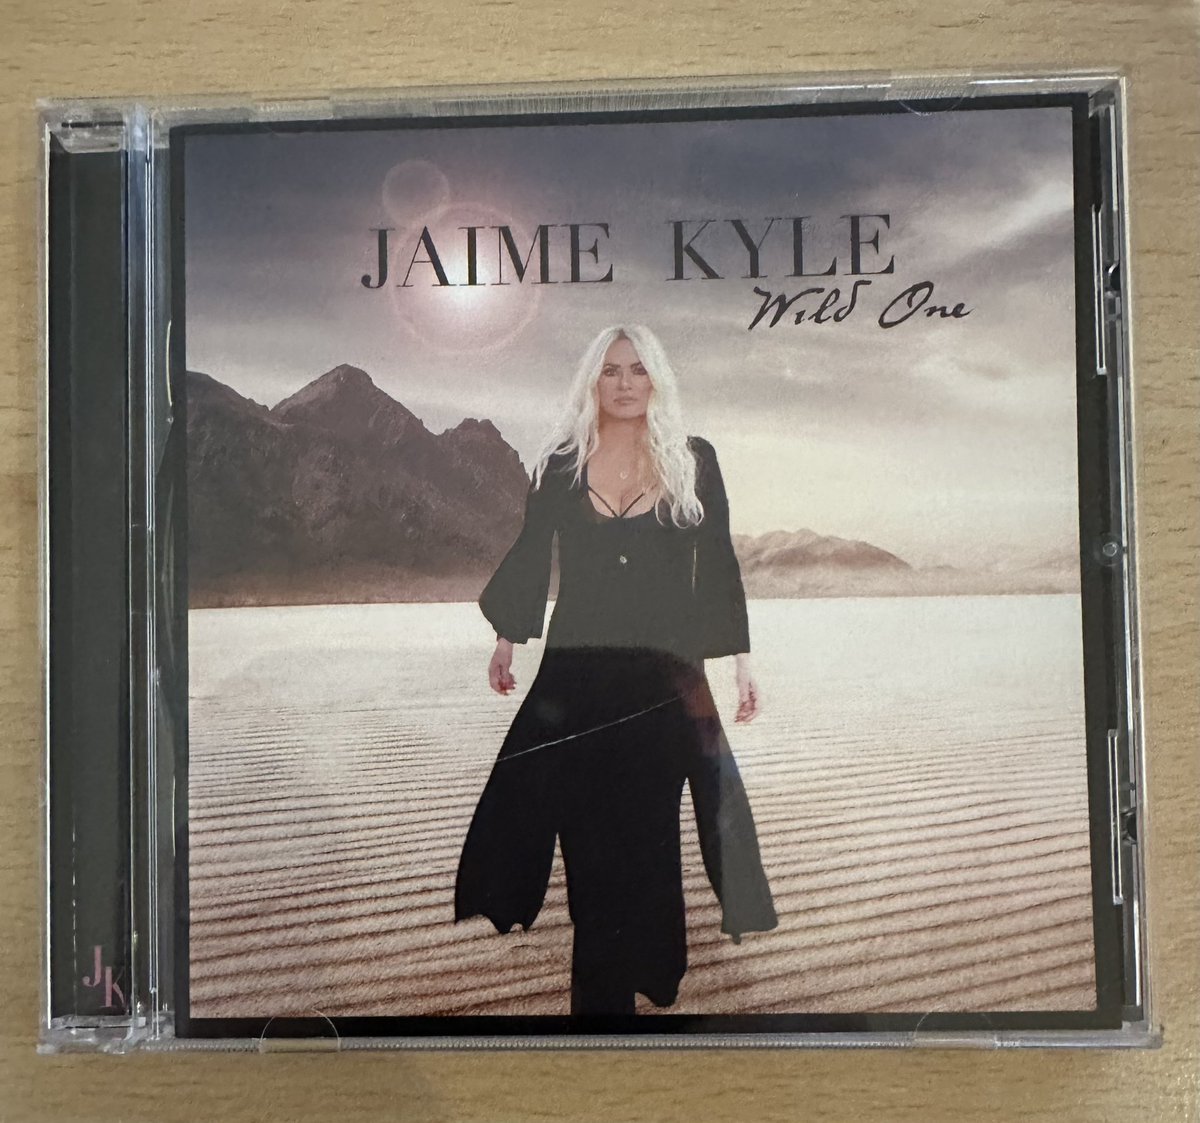 Enjoying the Wild One album from the fabulous @JaimeKyleMusic Must admit a new artist to me - thank you to the late, great @Bernie_Marsden for introducing - now discovering back catalogue